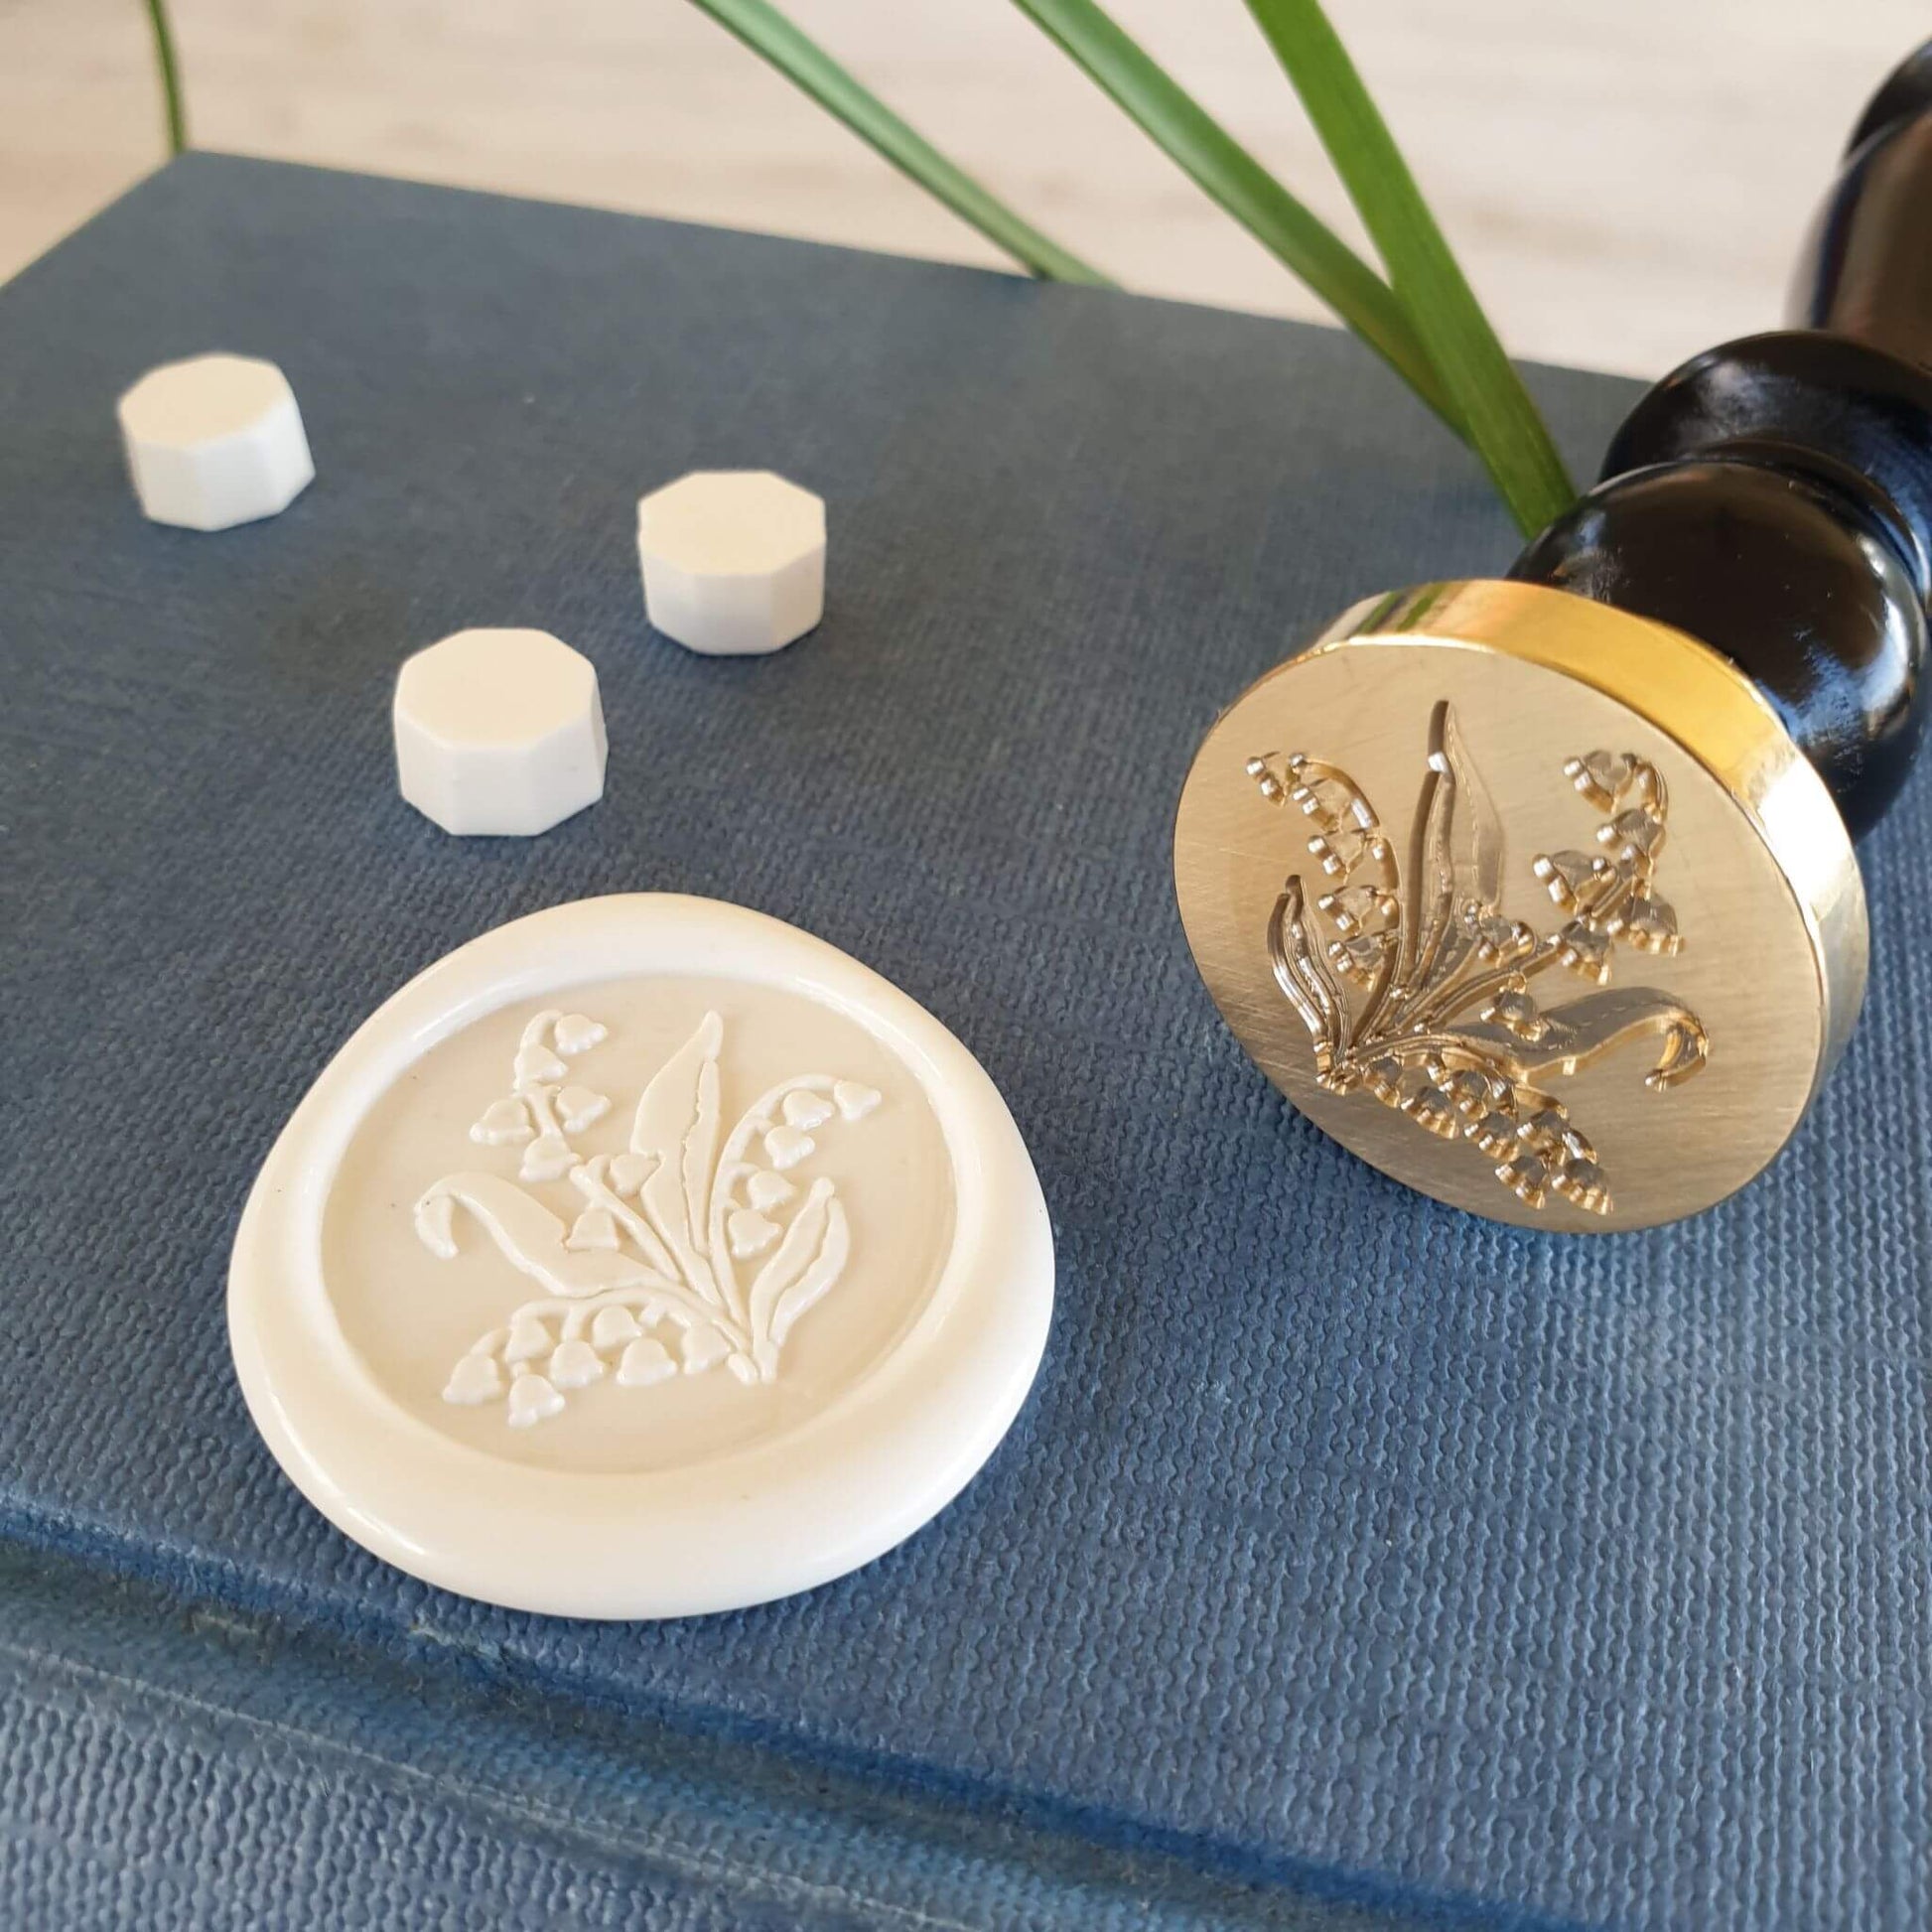 wax seal with lily of the valley design on vintage books